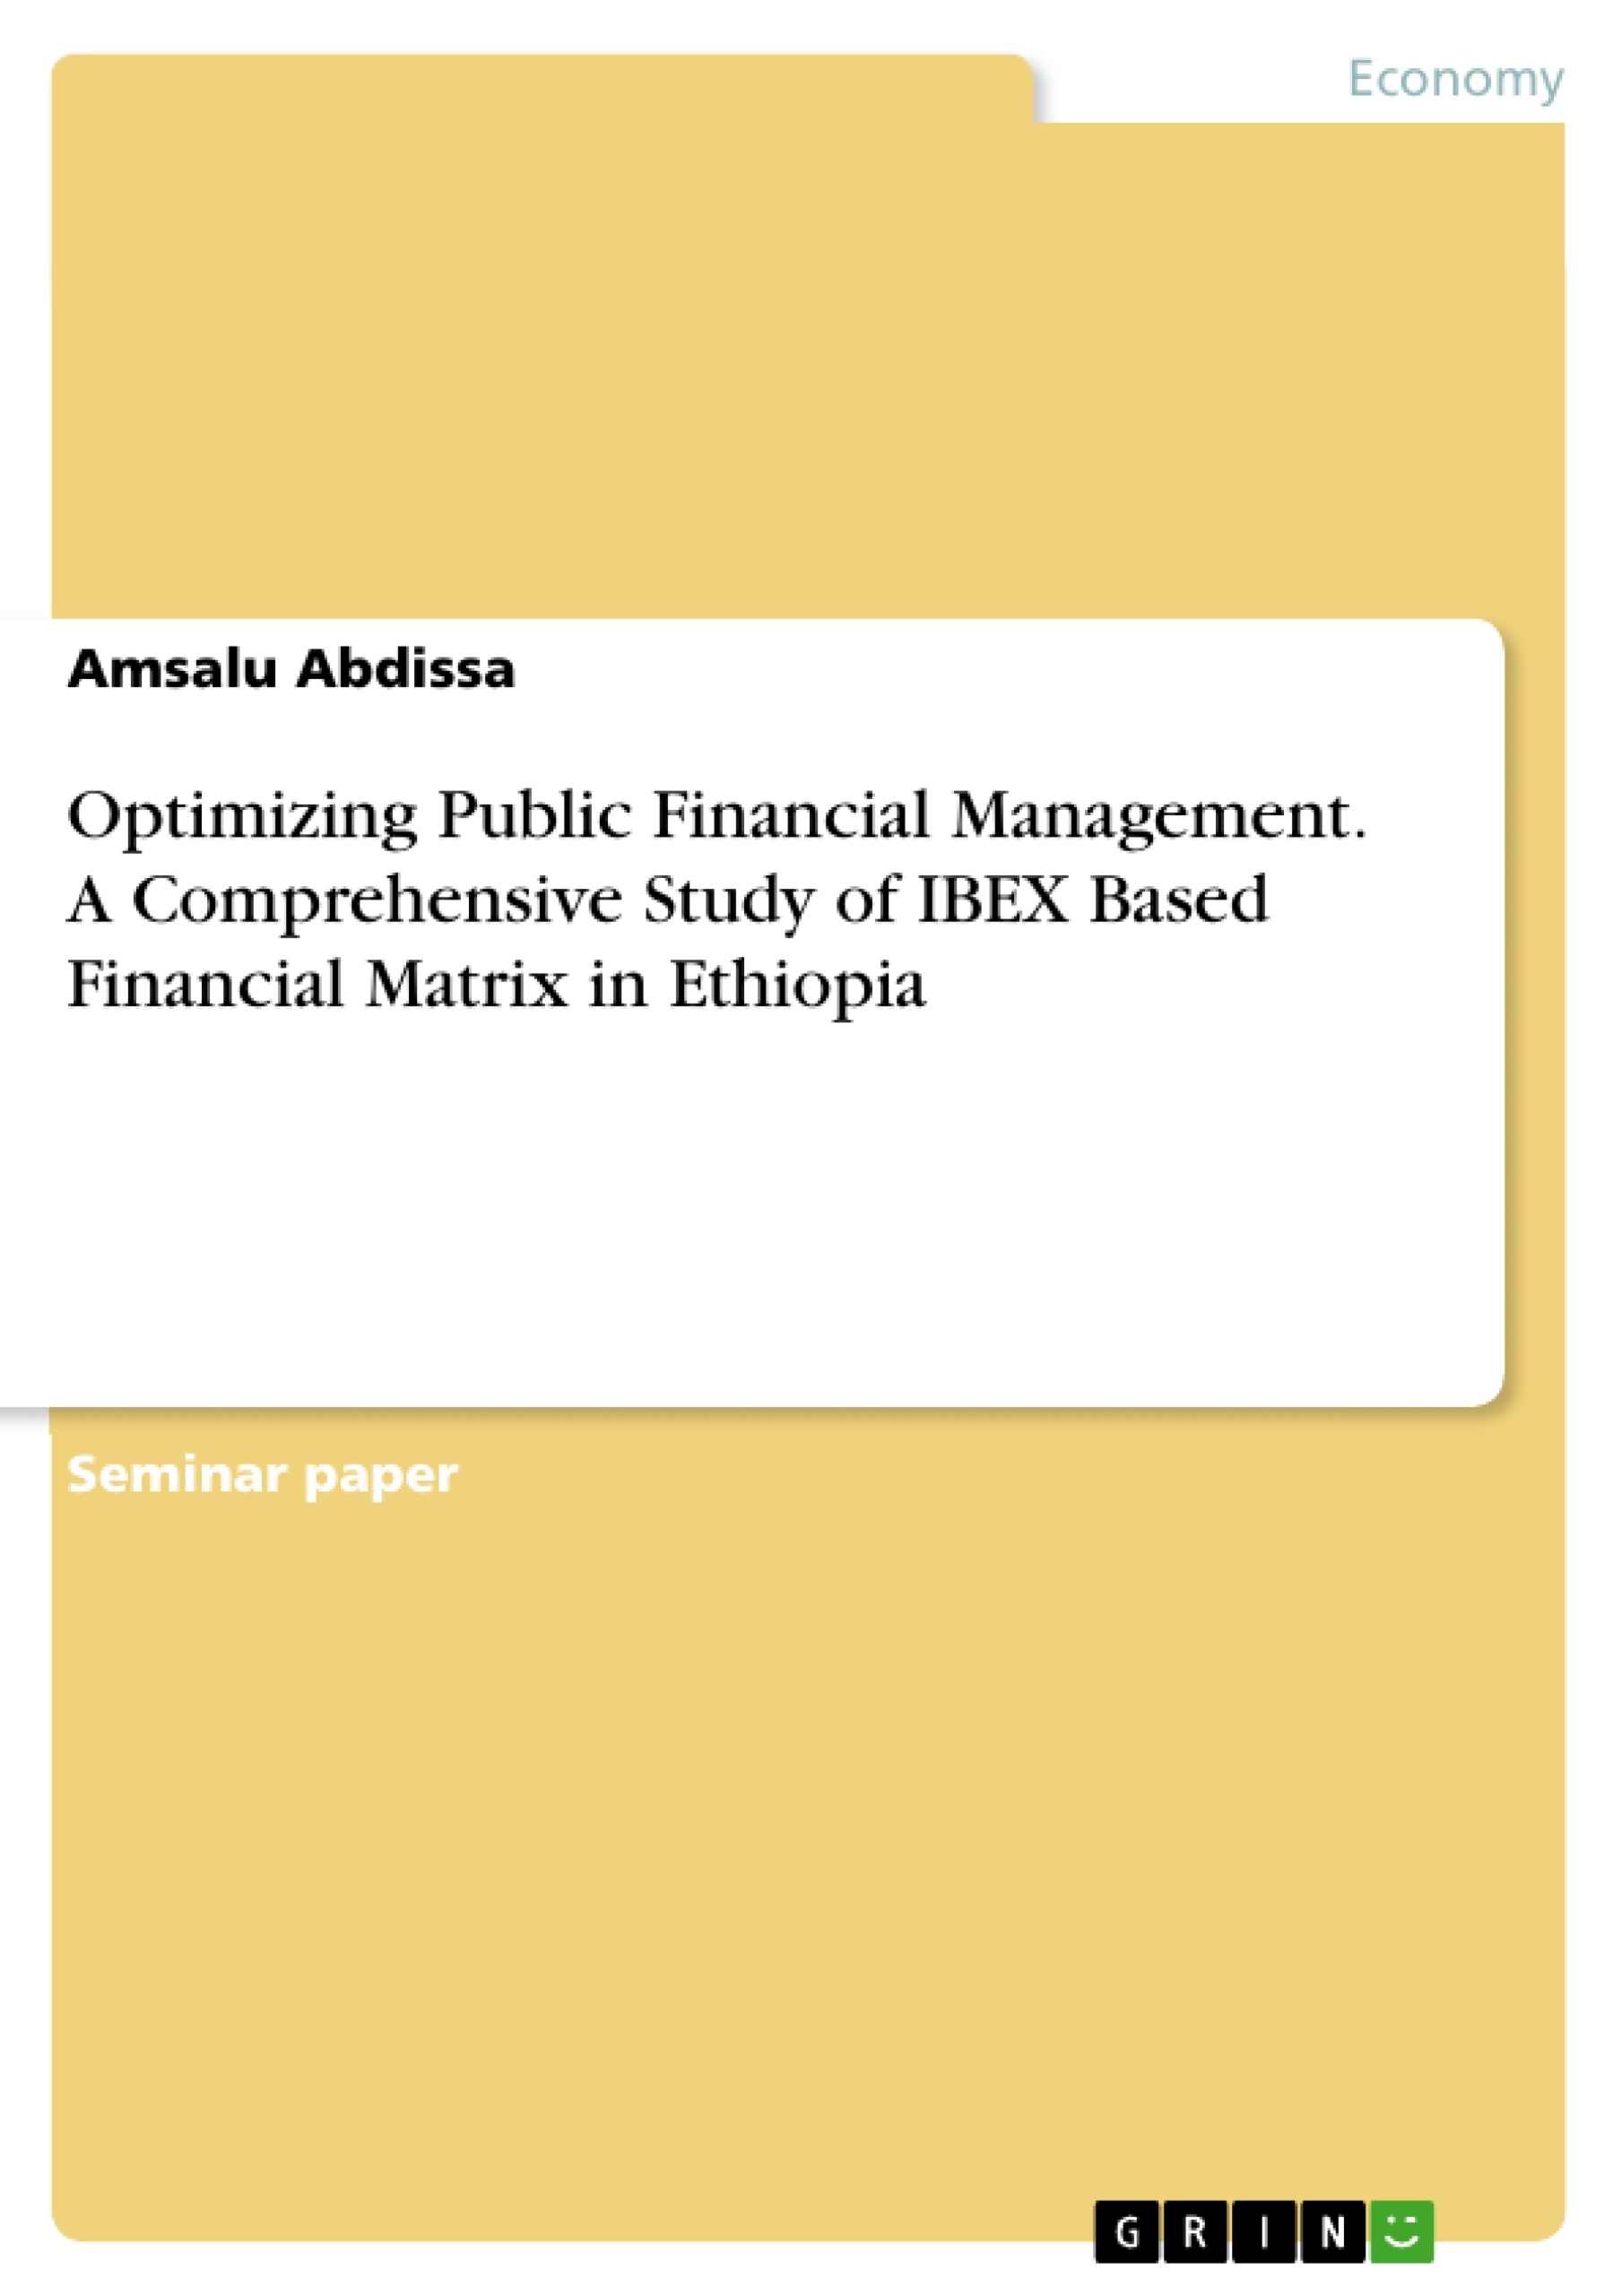 Title: Optimizing Public Financial Management. A Comprehensive Study of IBEX Based Financial Matrix in Ethiopia